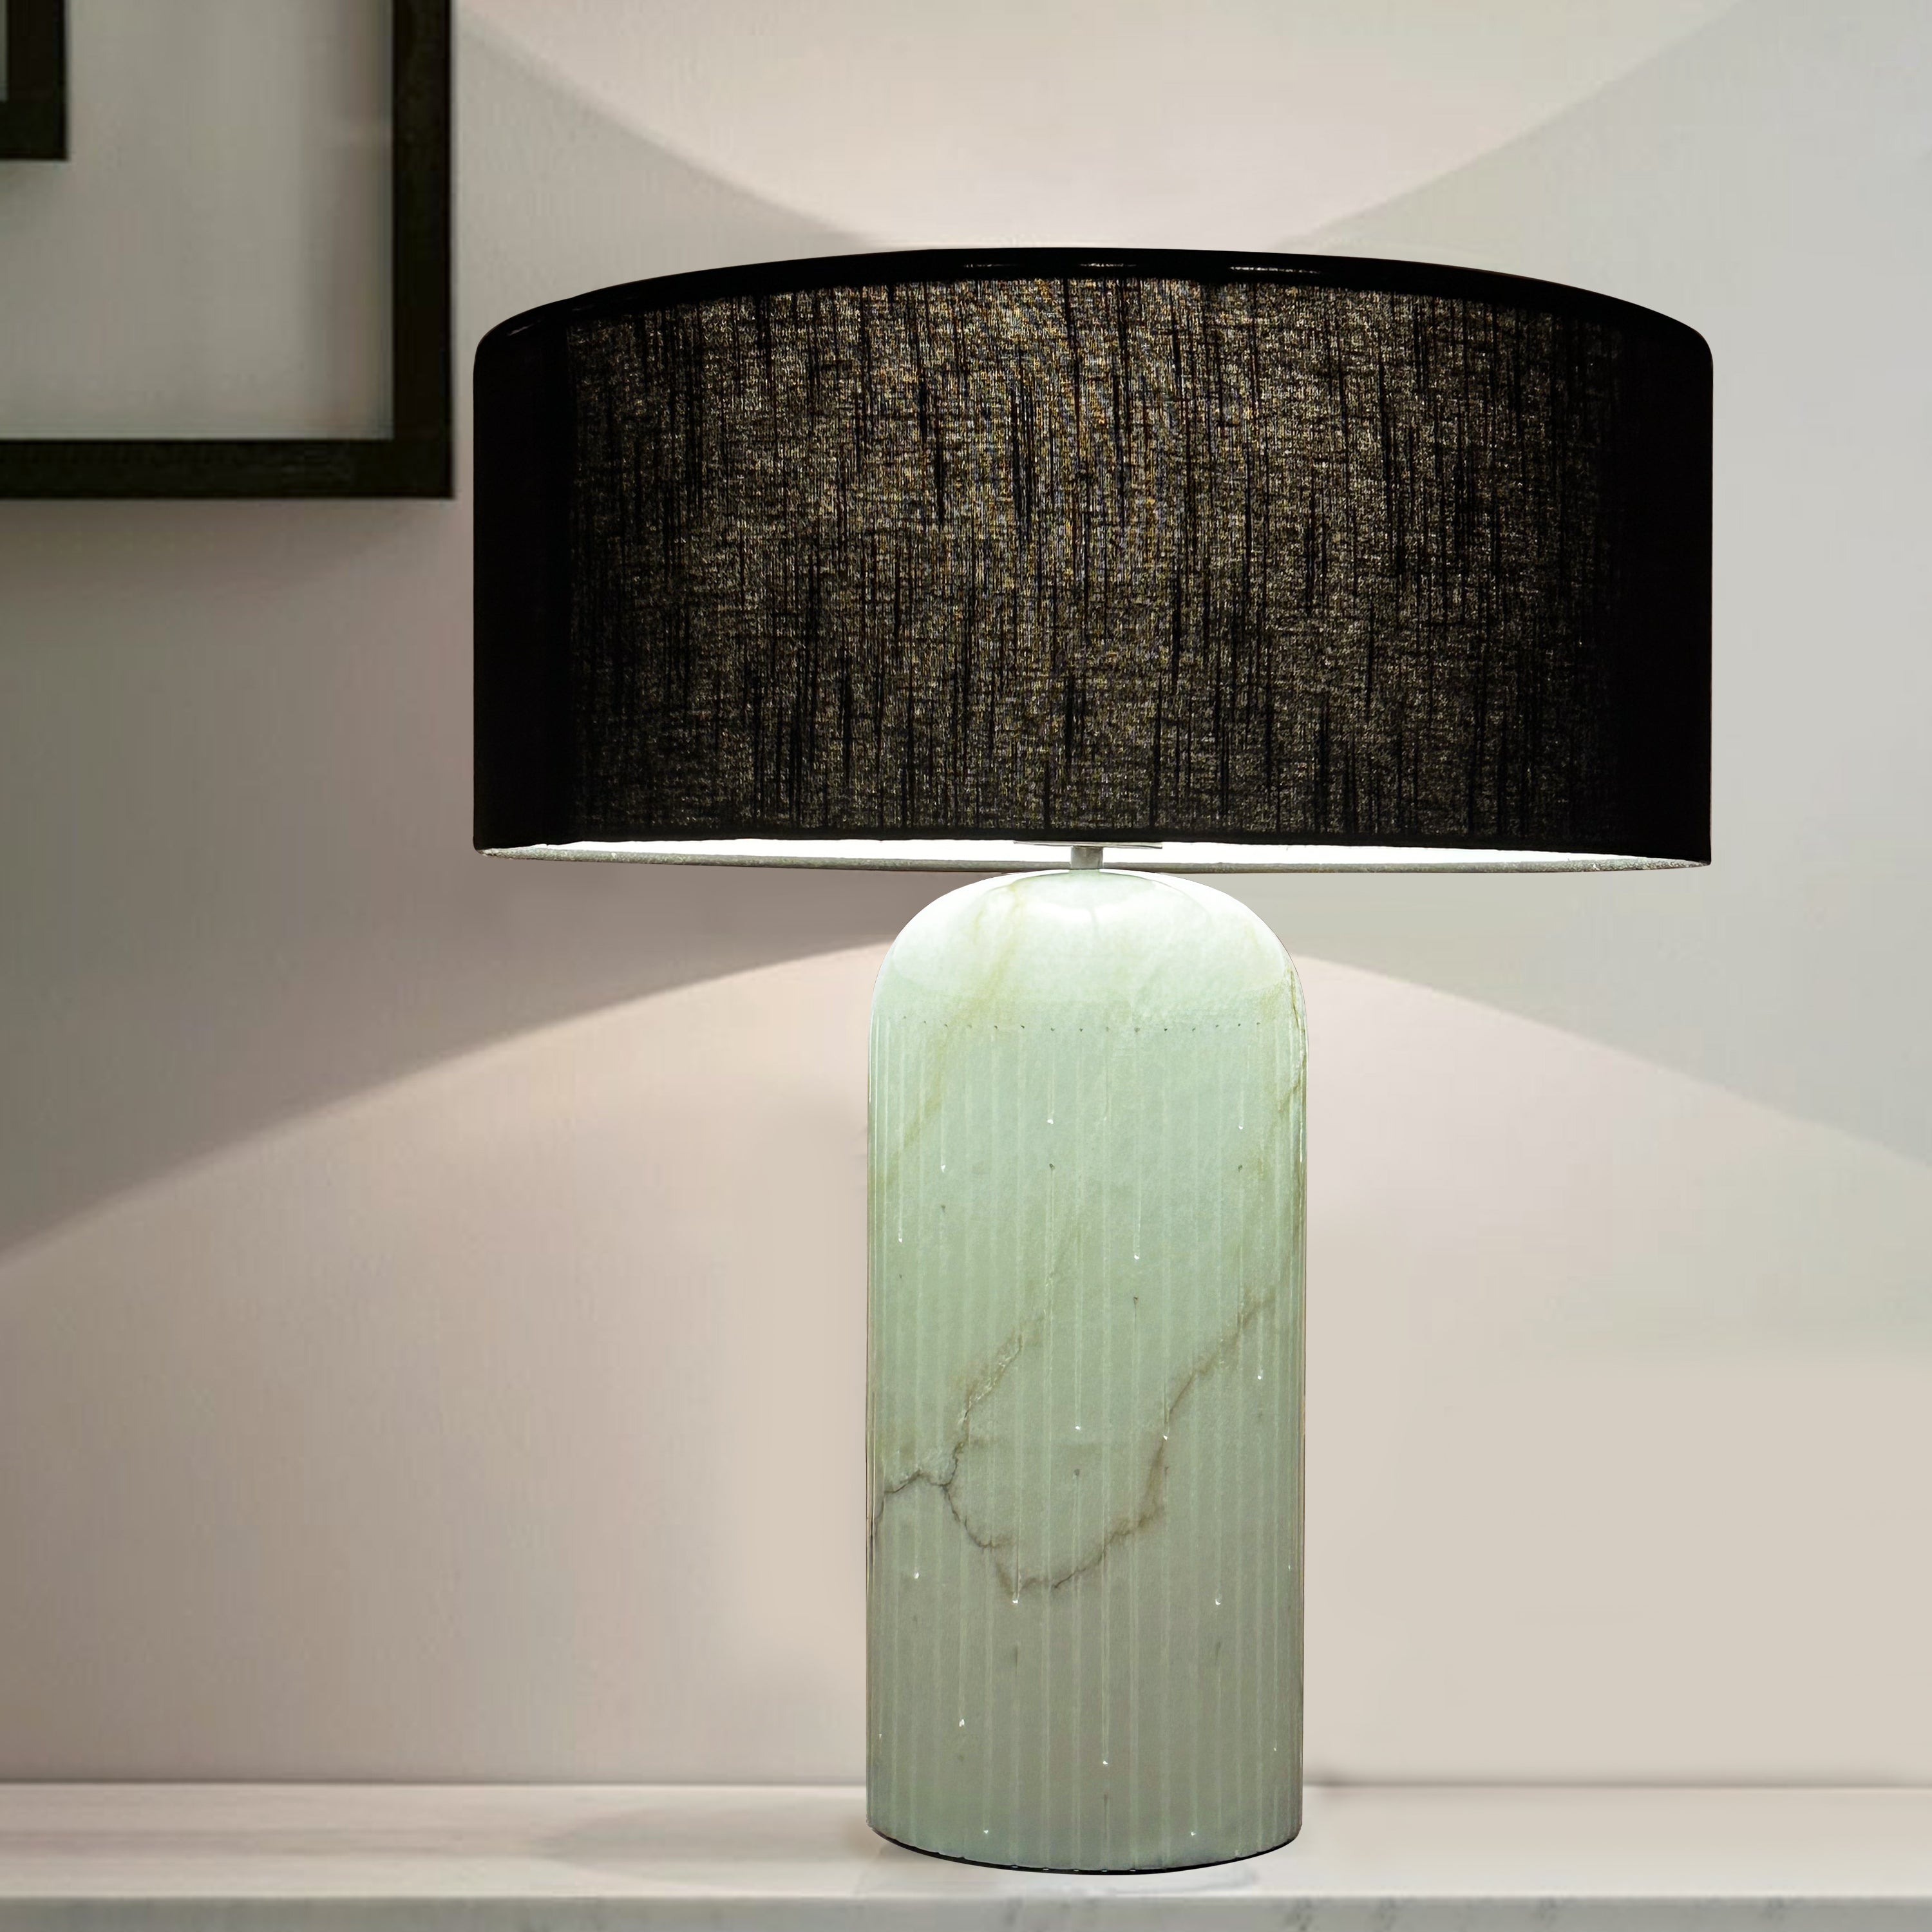 Line'On It - Cylindrical Table Lamp